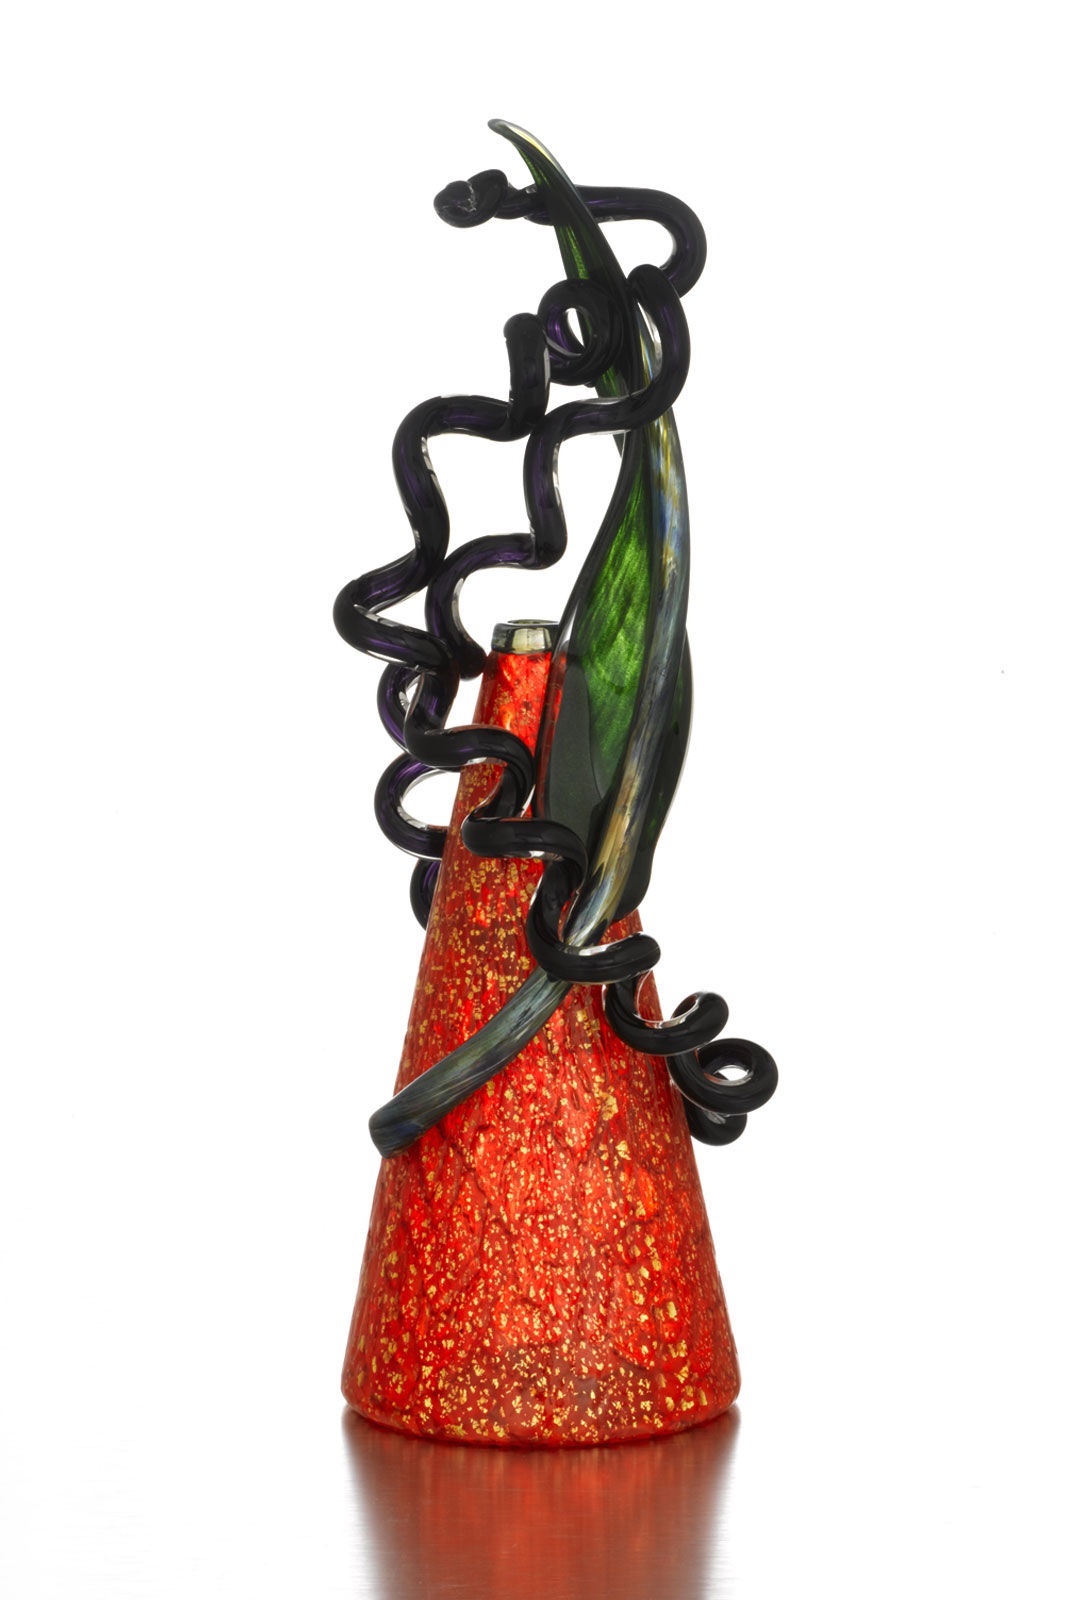 Orange Piccolo Venetian with Black Leaf and Coils, 1994 by Dale Chihuly